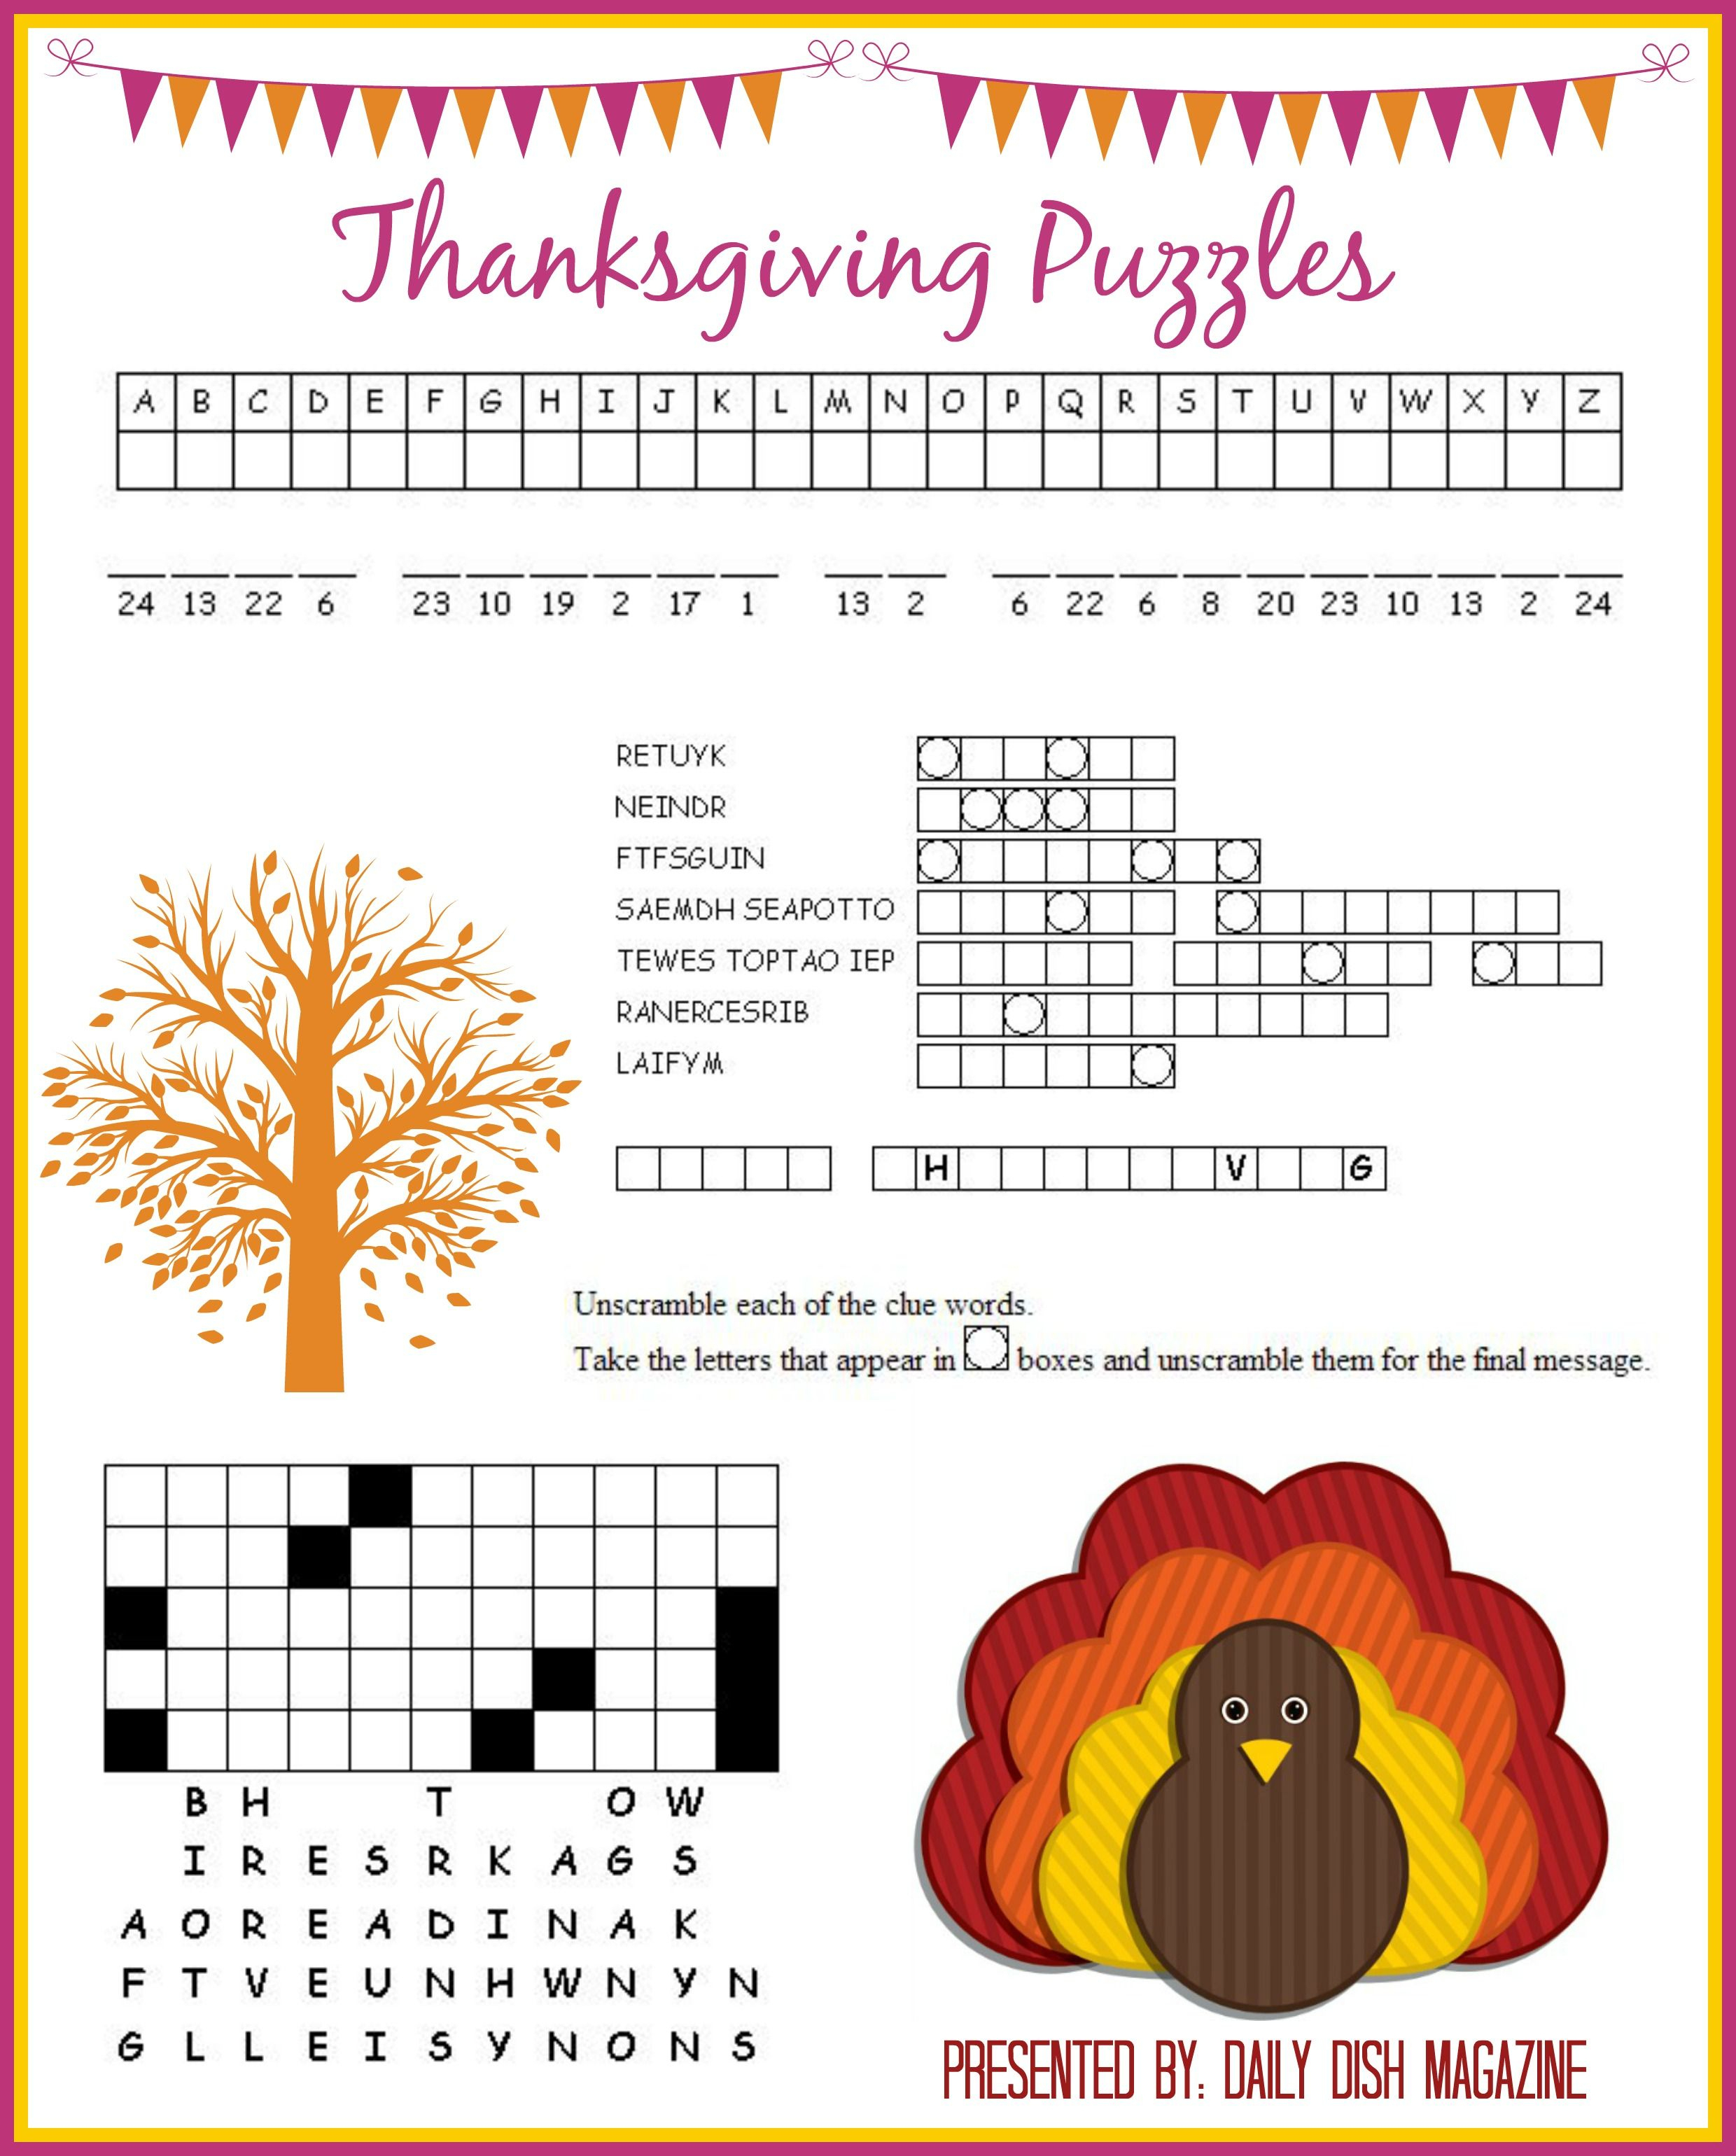 Thanksgiving Puzzles Printables | *holidays We Celebrate - Free Thanksgiving Crossword Puzzles Printable